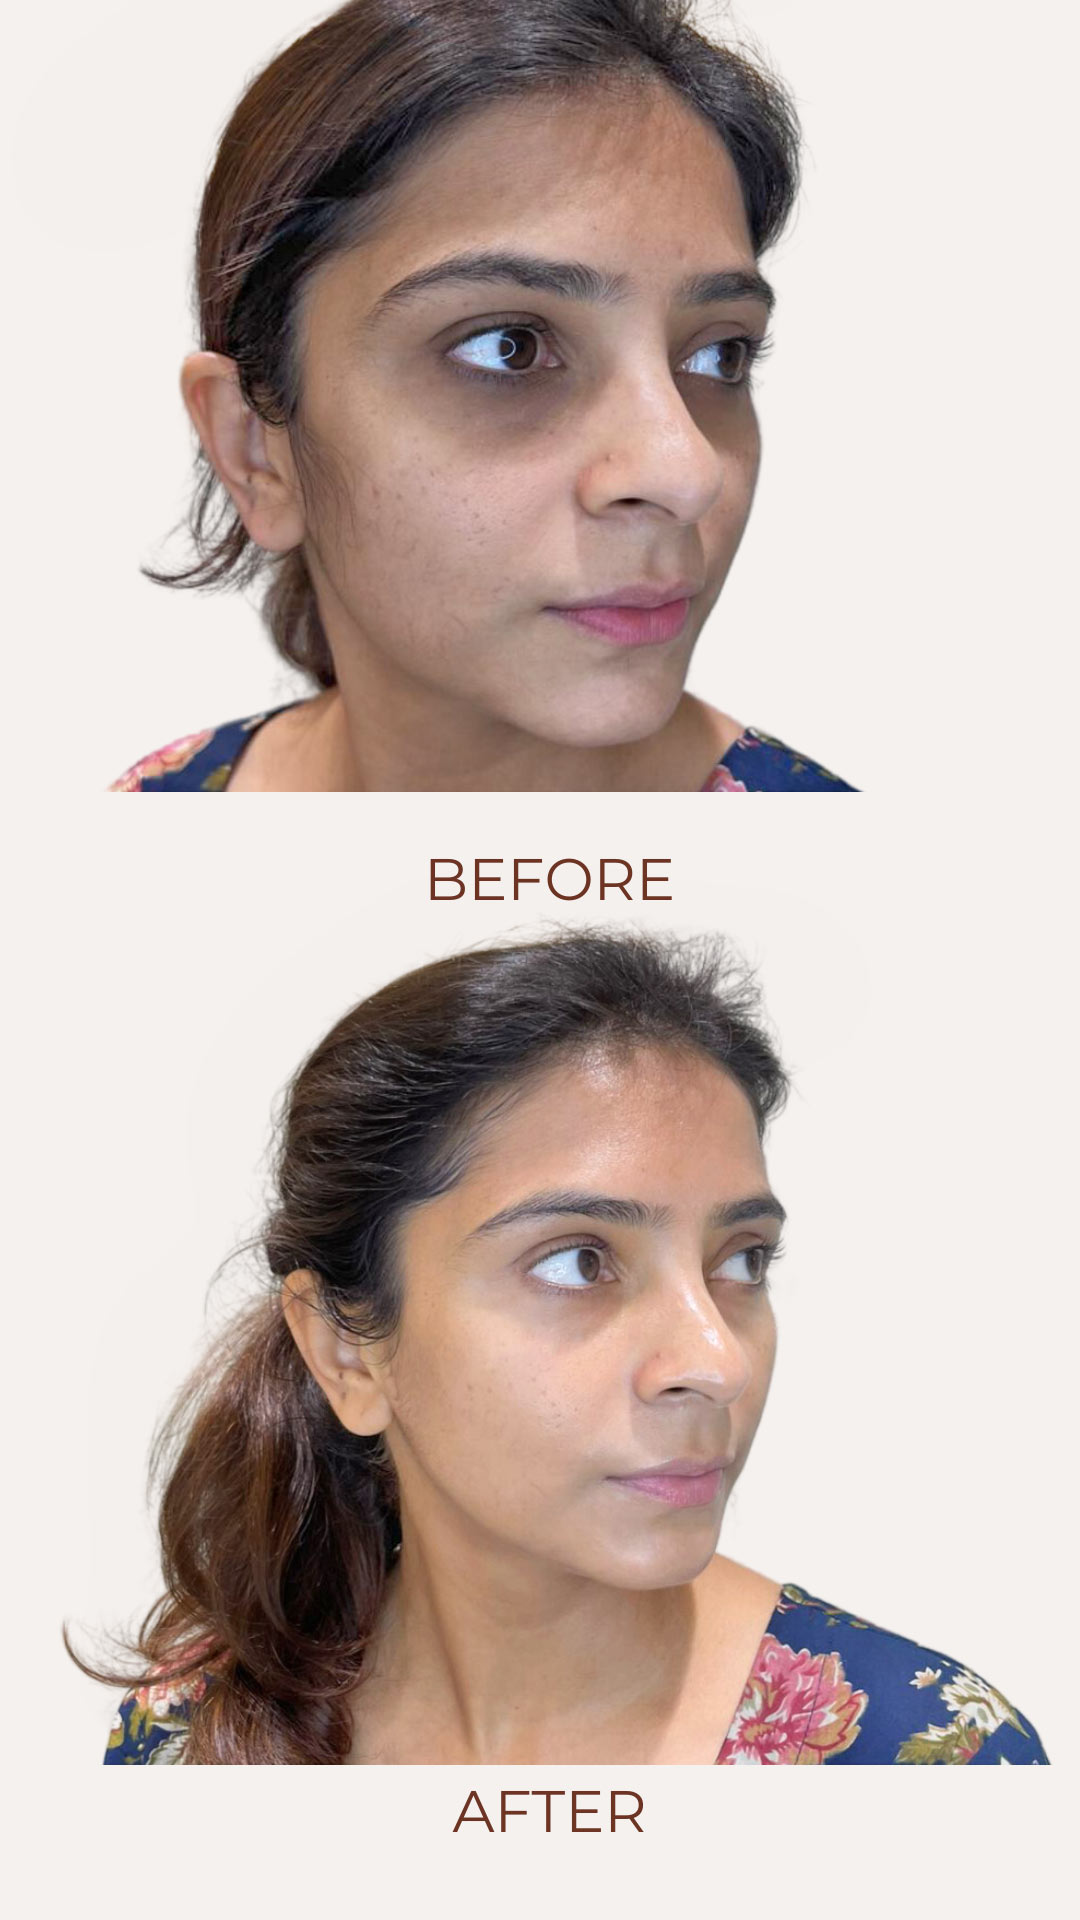 White-Minimal-Before-After-Treatment-Instagram-Story